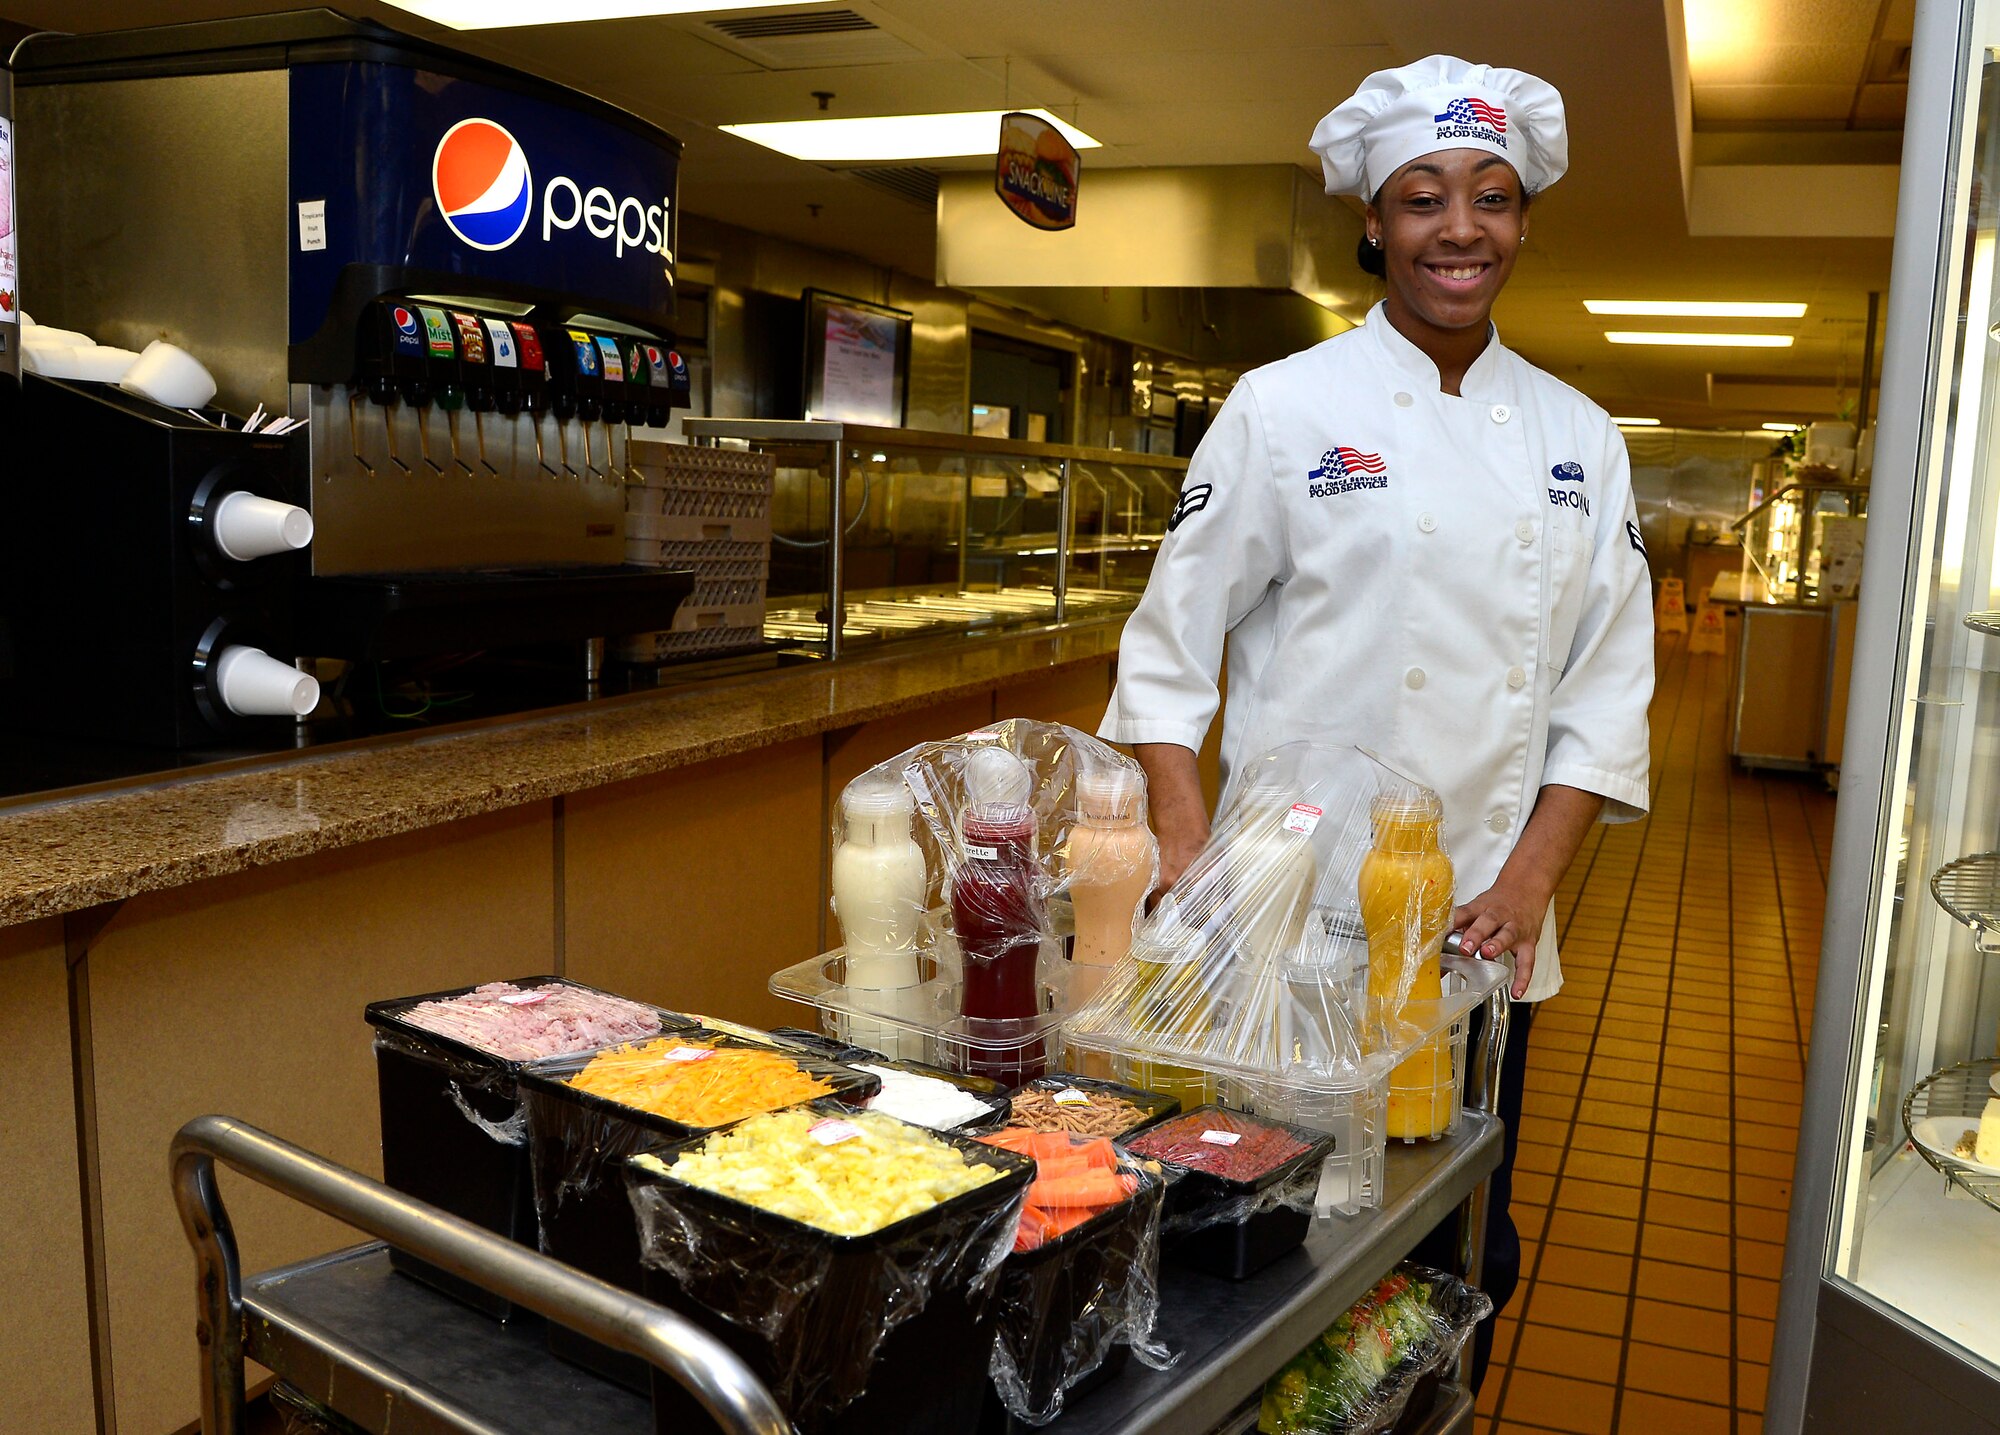 Airman 1st Class Ashanti Brown, 436th Force Support Squadron baker, poses in front of the salad bar at the Patterson Dining Facility on Dover Air Force Base, Del., May 8. The DFAC serves about 600-700 Airmen a day. (U.S. Air Force photo/David S. Tucker)